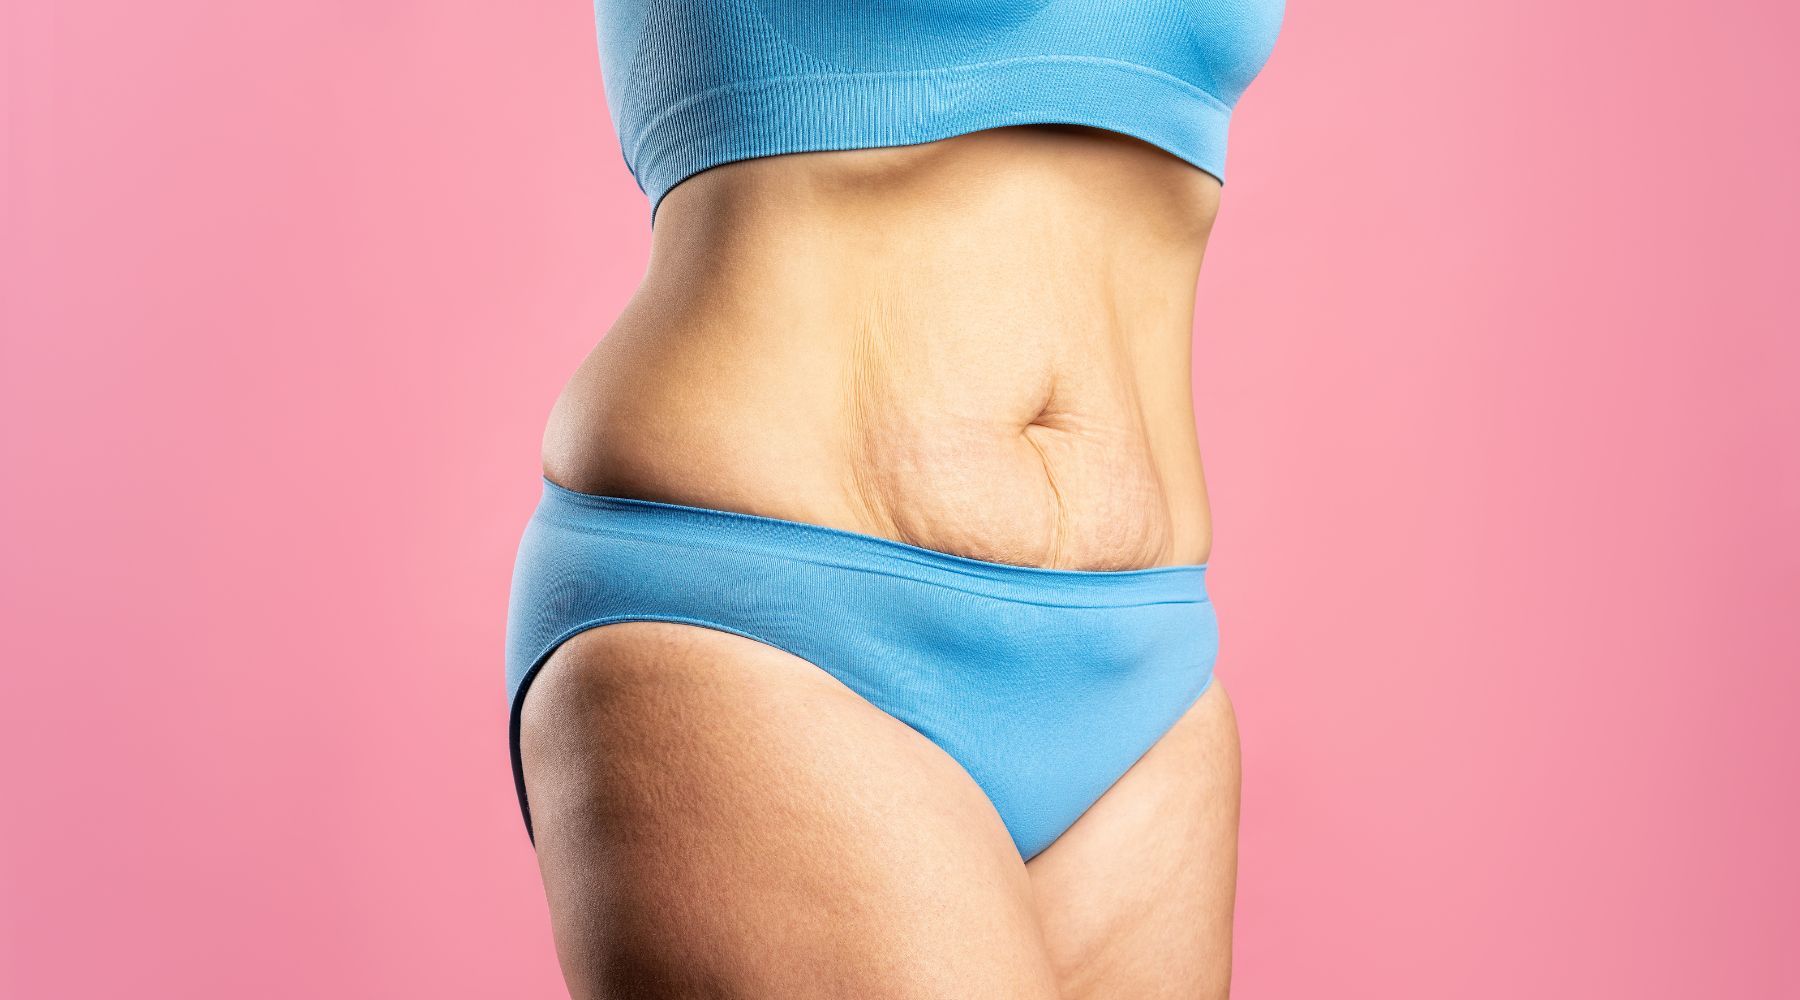 How to Get Rid of Hanging Belly Fat (Without Surgery)